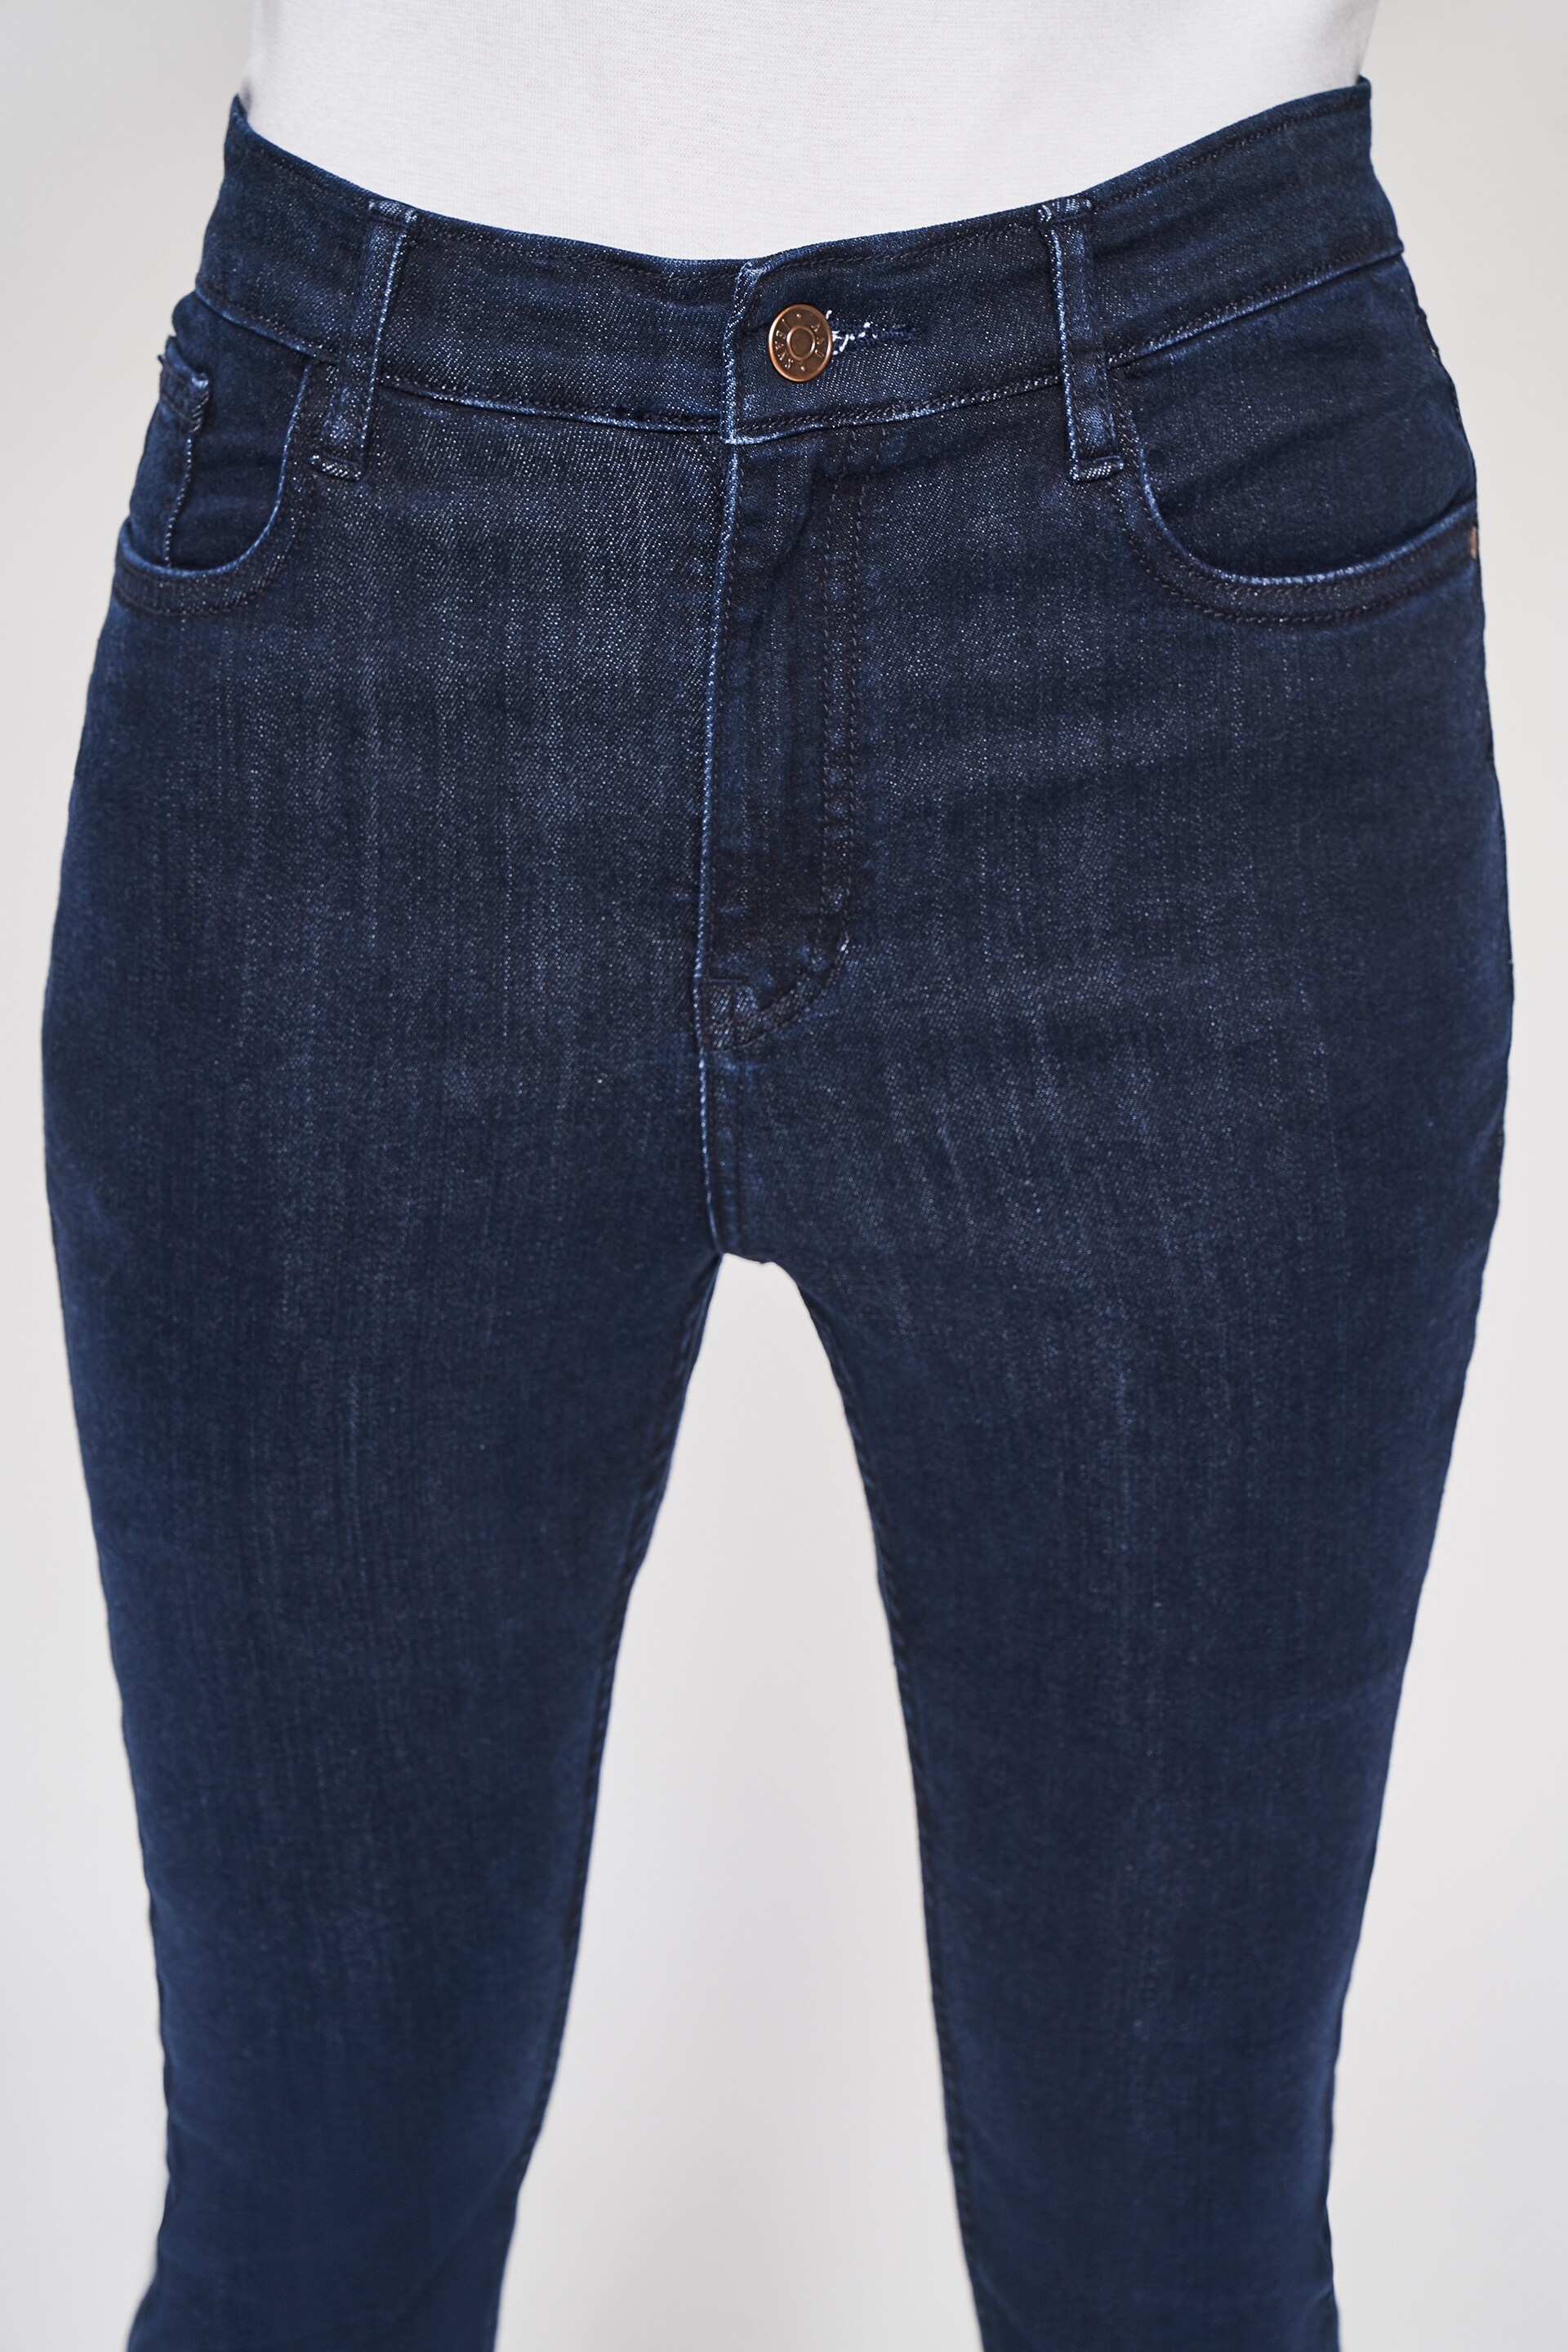 AND | AND DARK BLUE BOTTOM 4